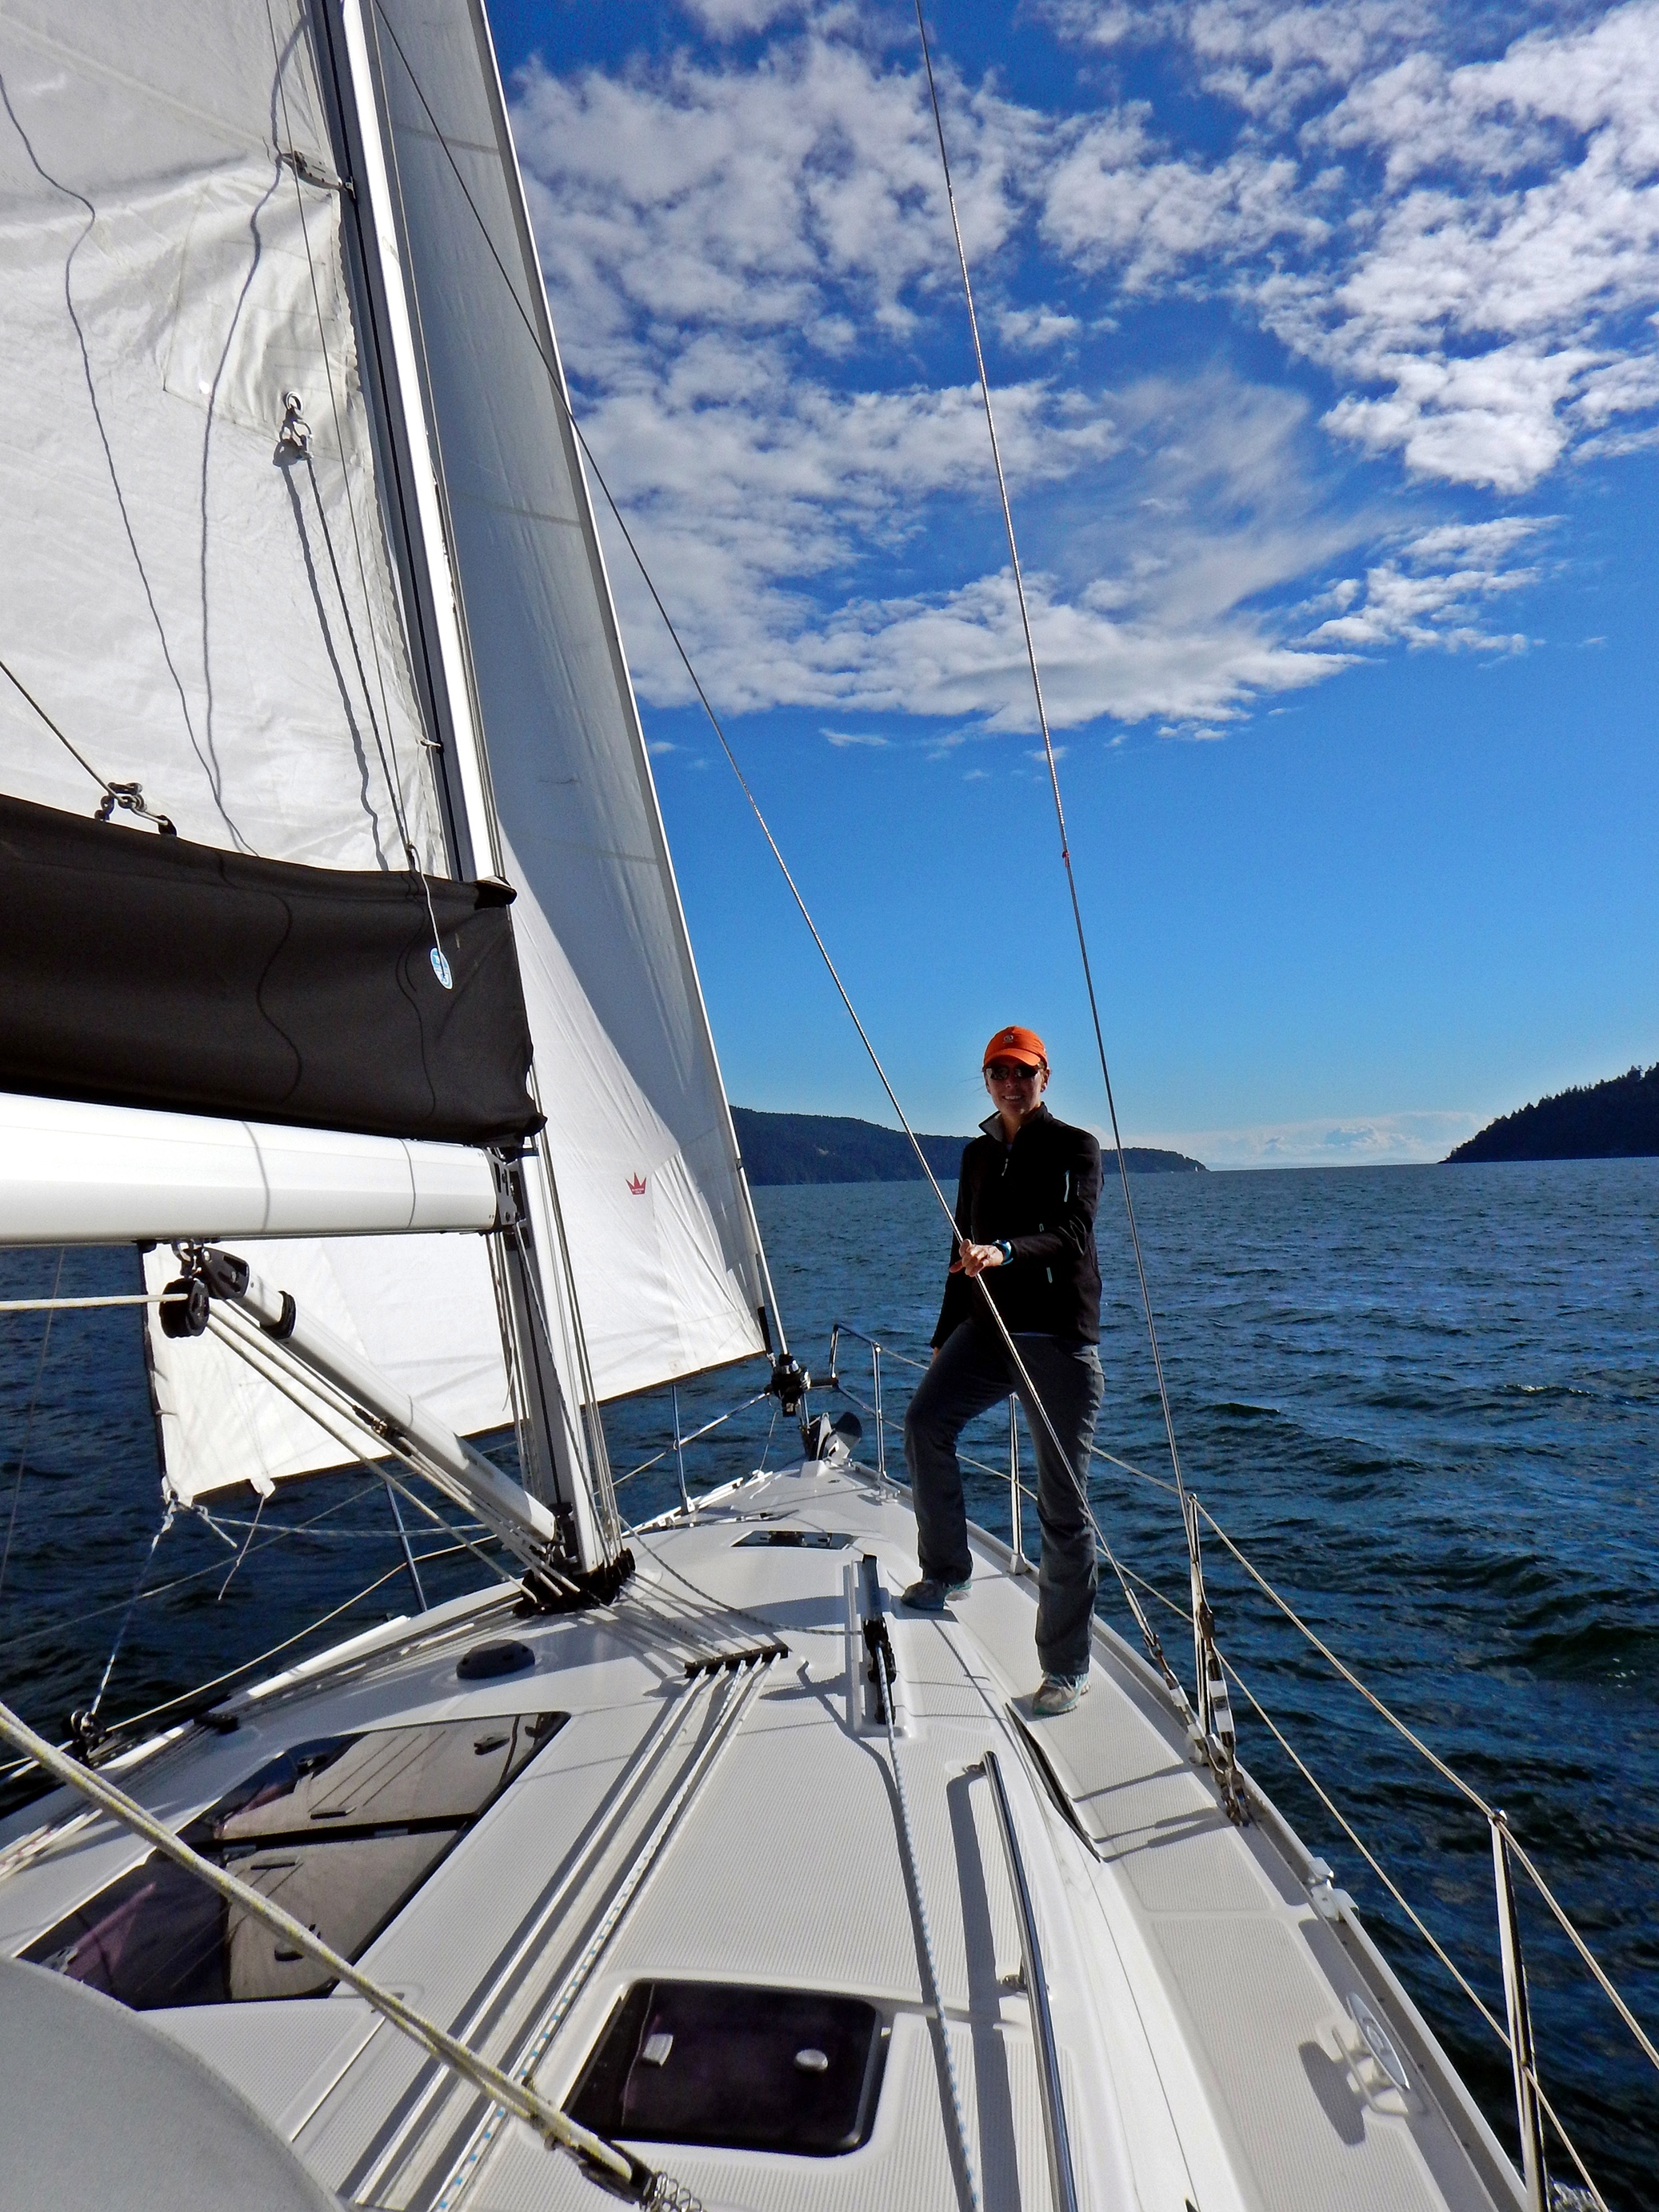 Sailing in Howe Sound